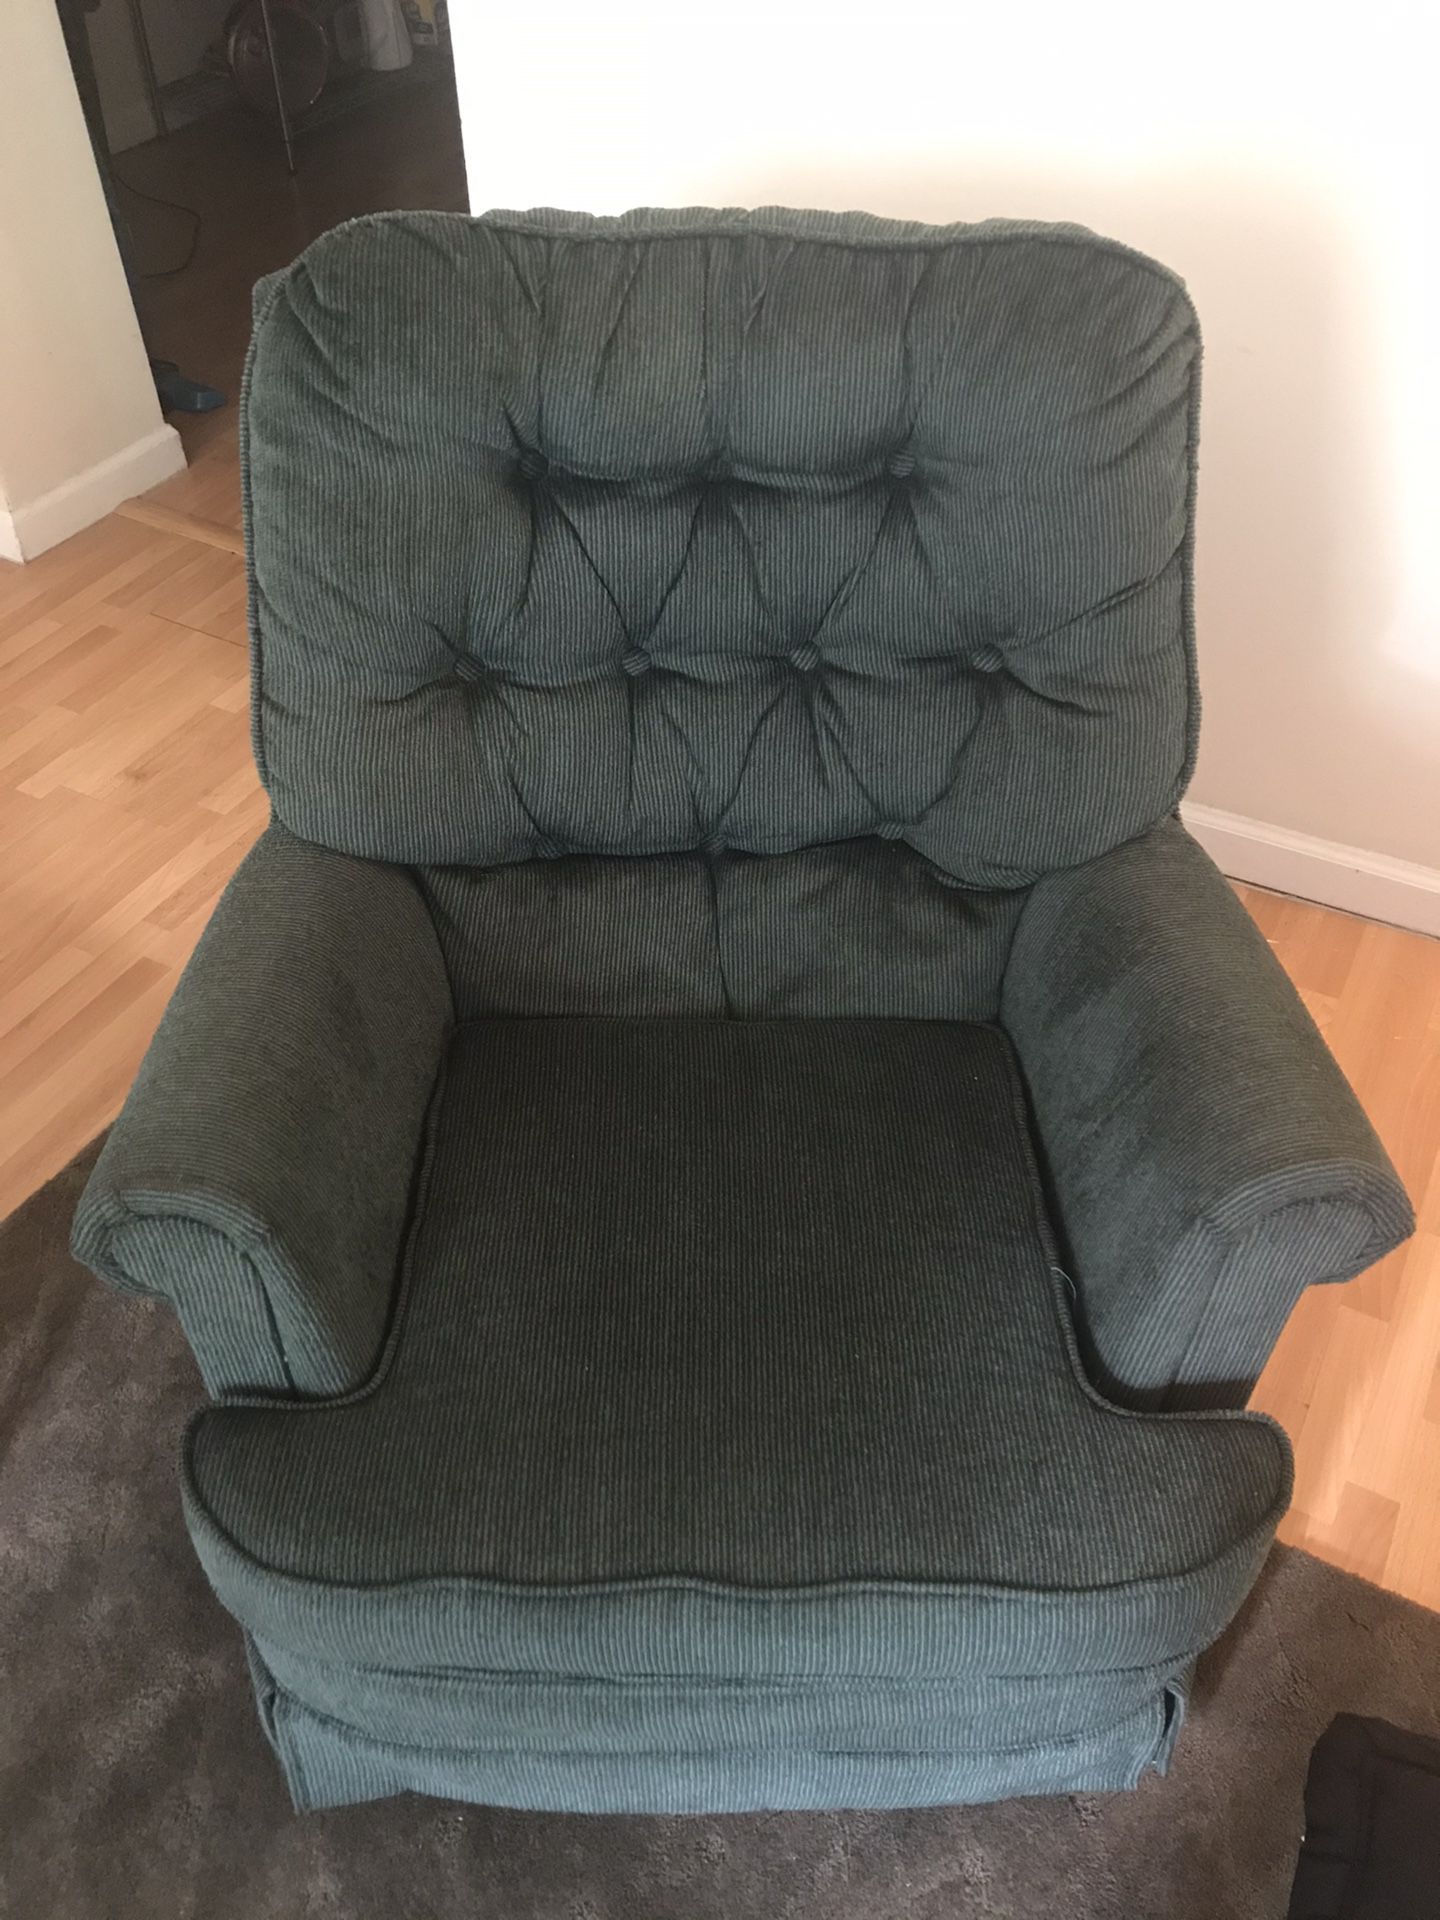 Green couch chair (360 swivel)